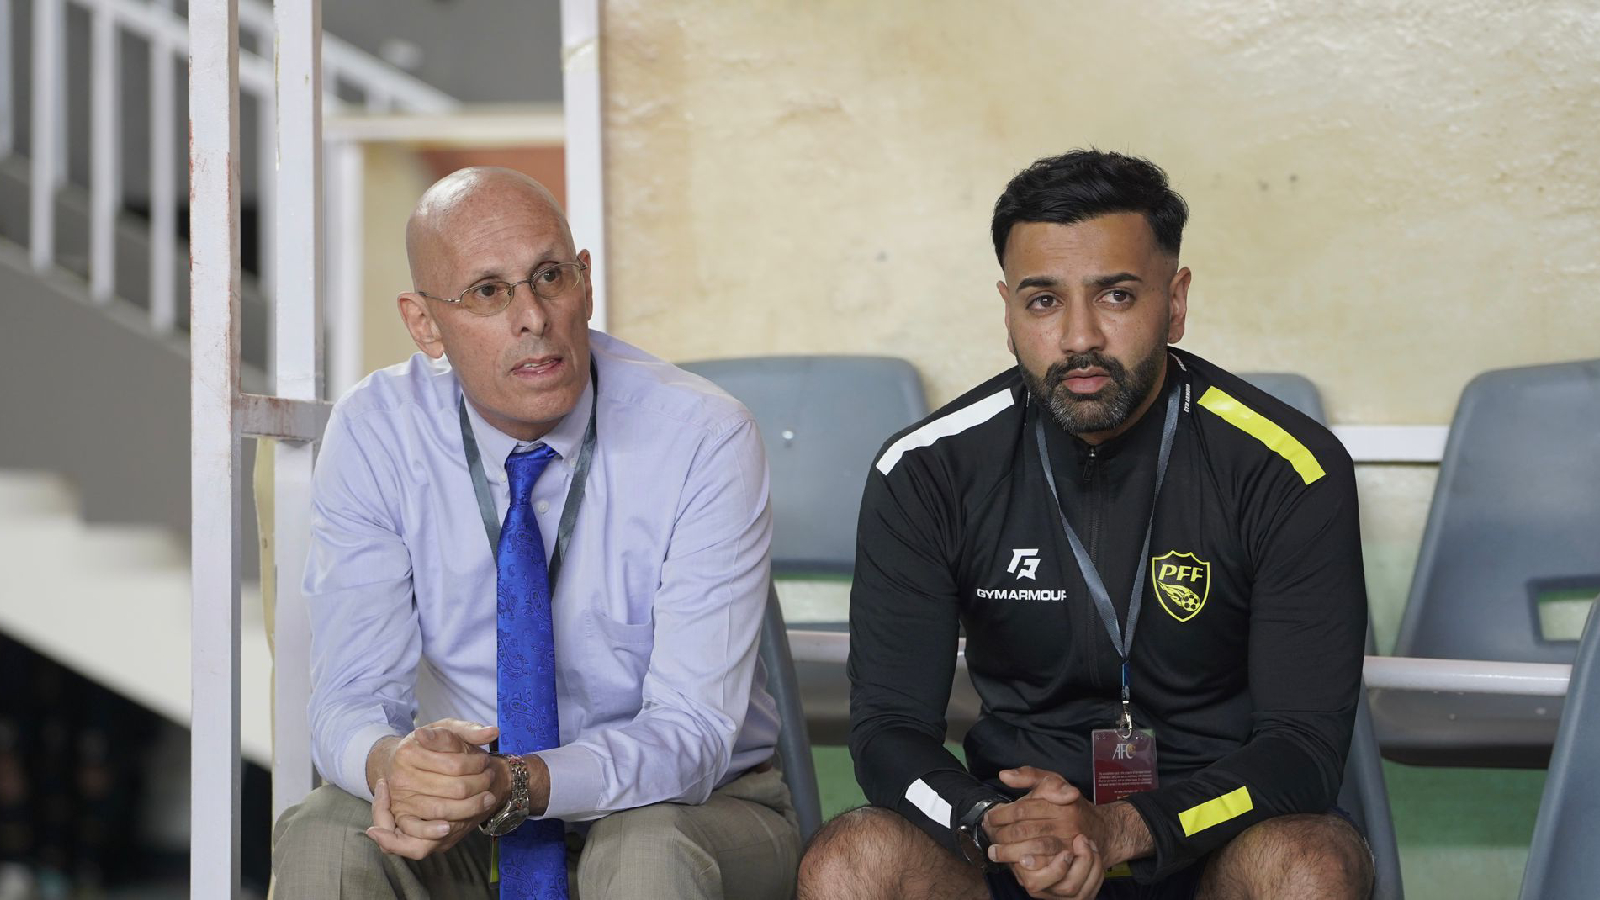 Bollywood songs, food trails and breaking barriers: How a British-Indian coach Trishan Patel is fuelling Pakistan’s football dream